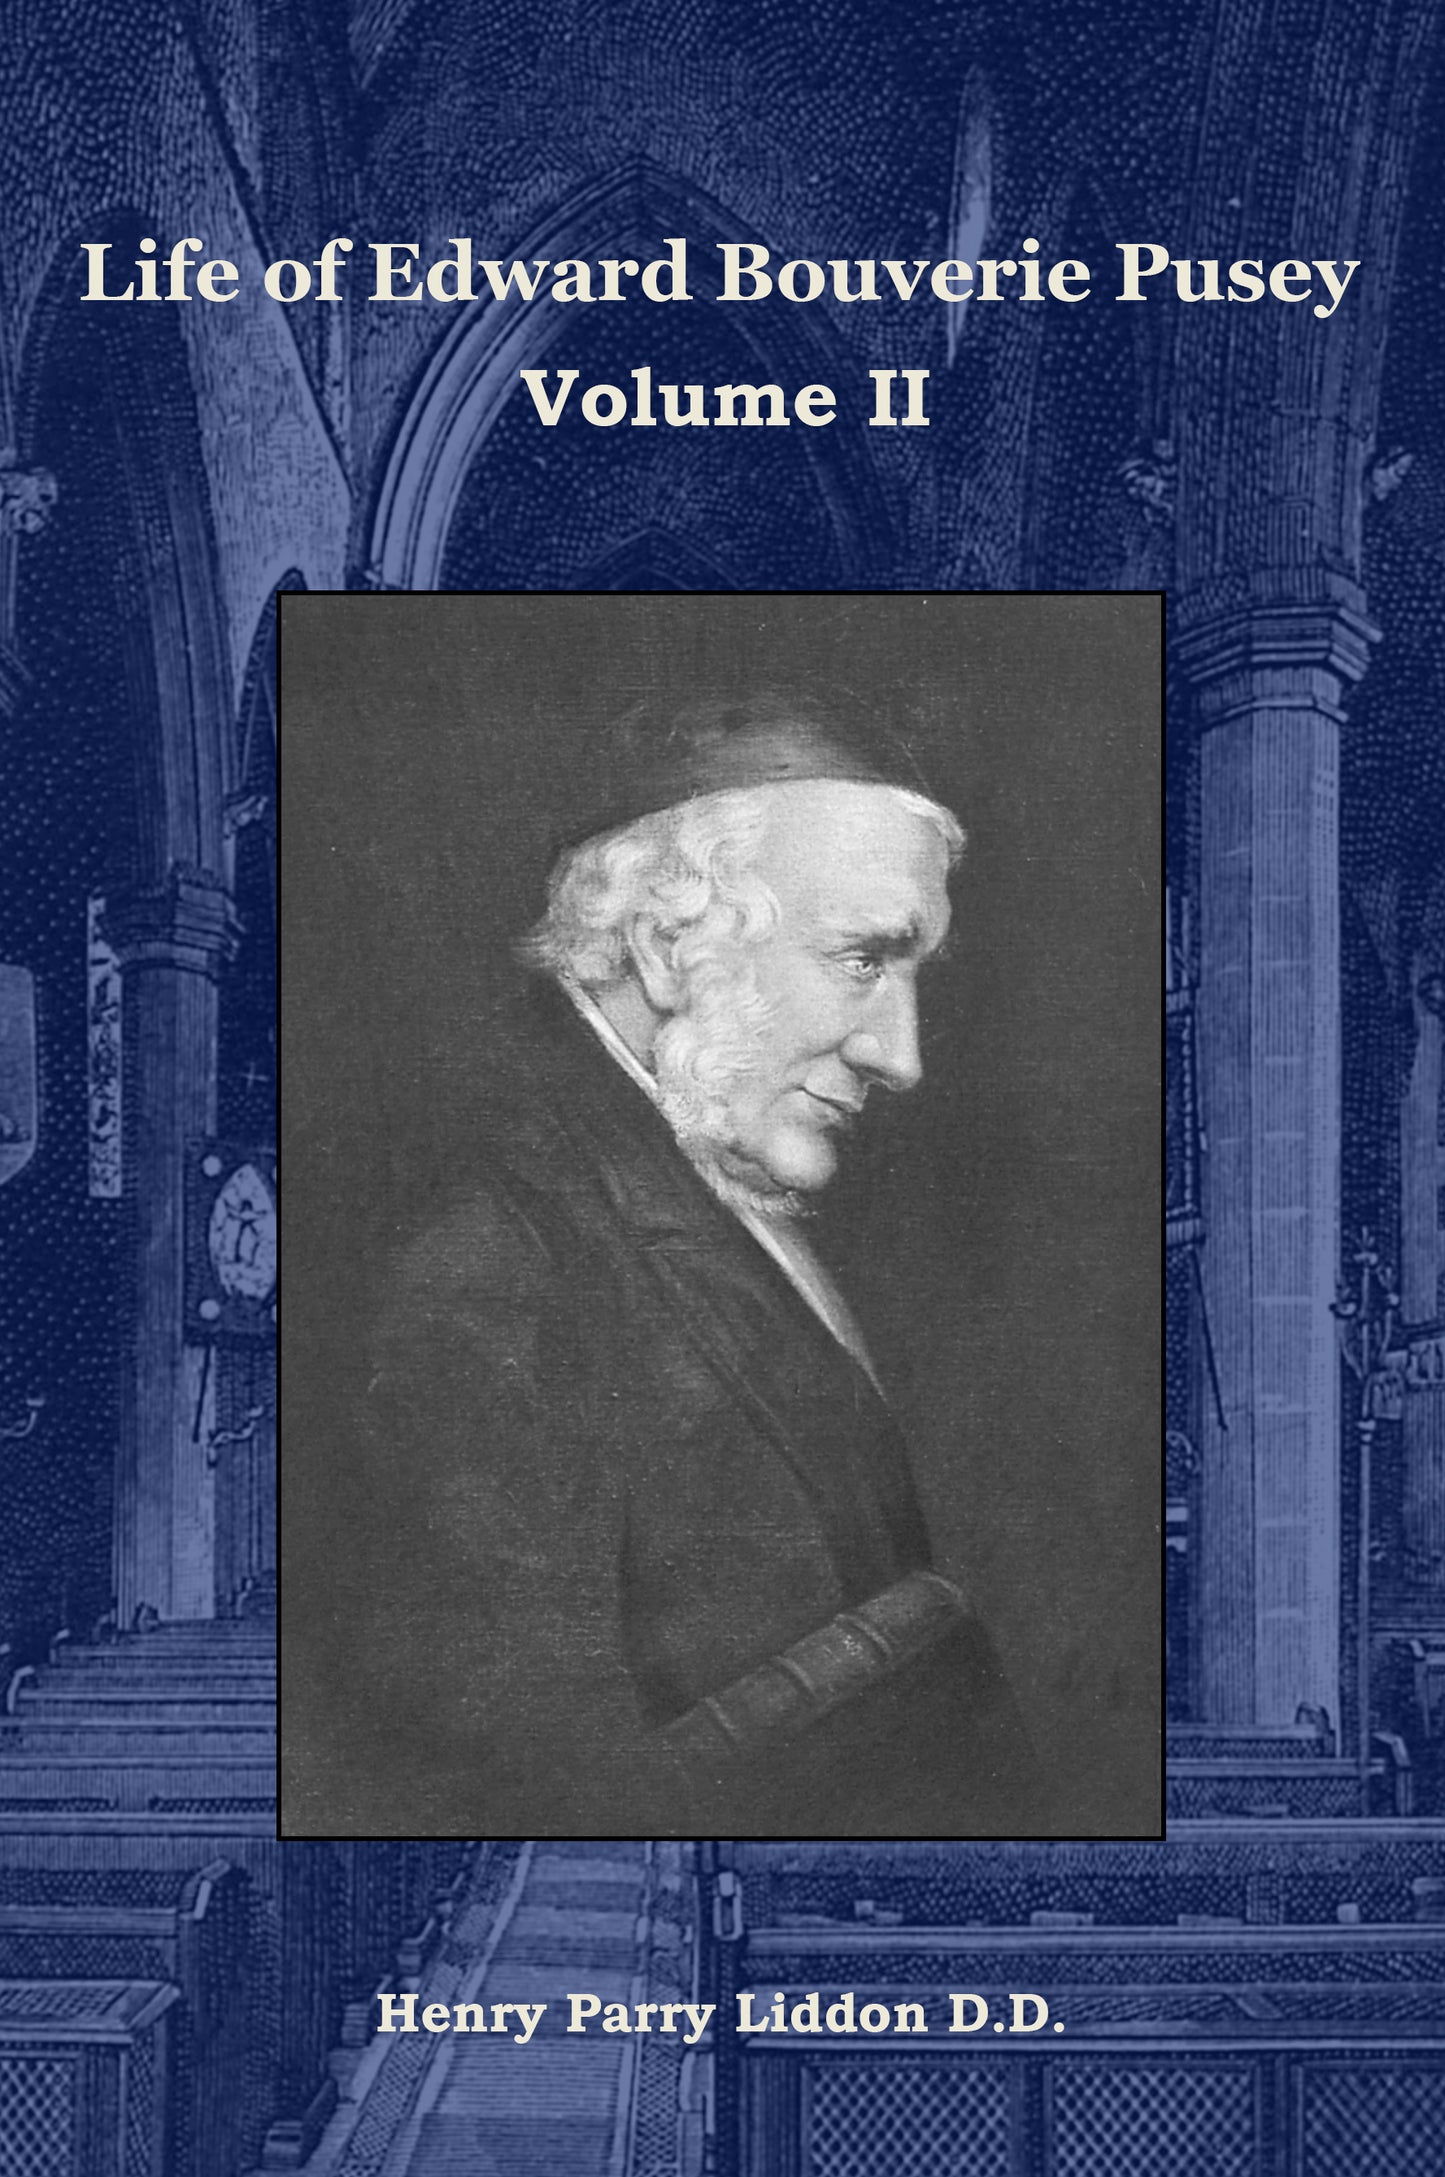 Life of Edward Bouverie Pusey, Volume II